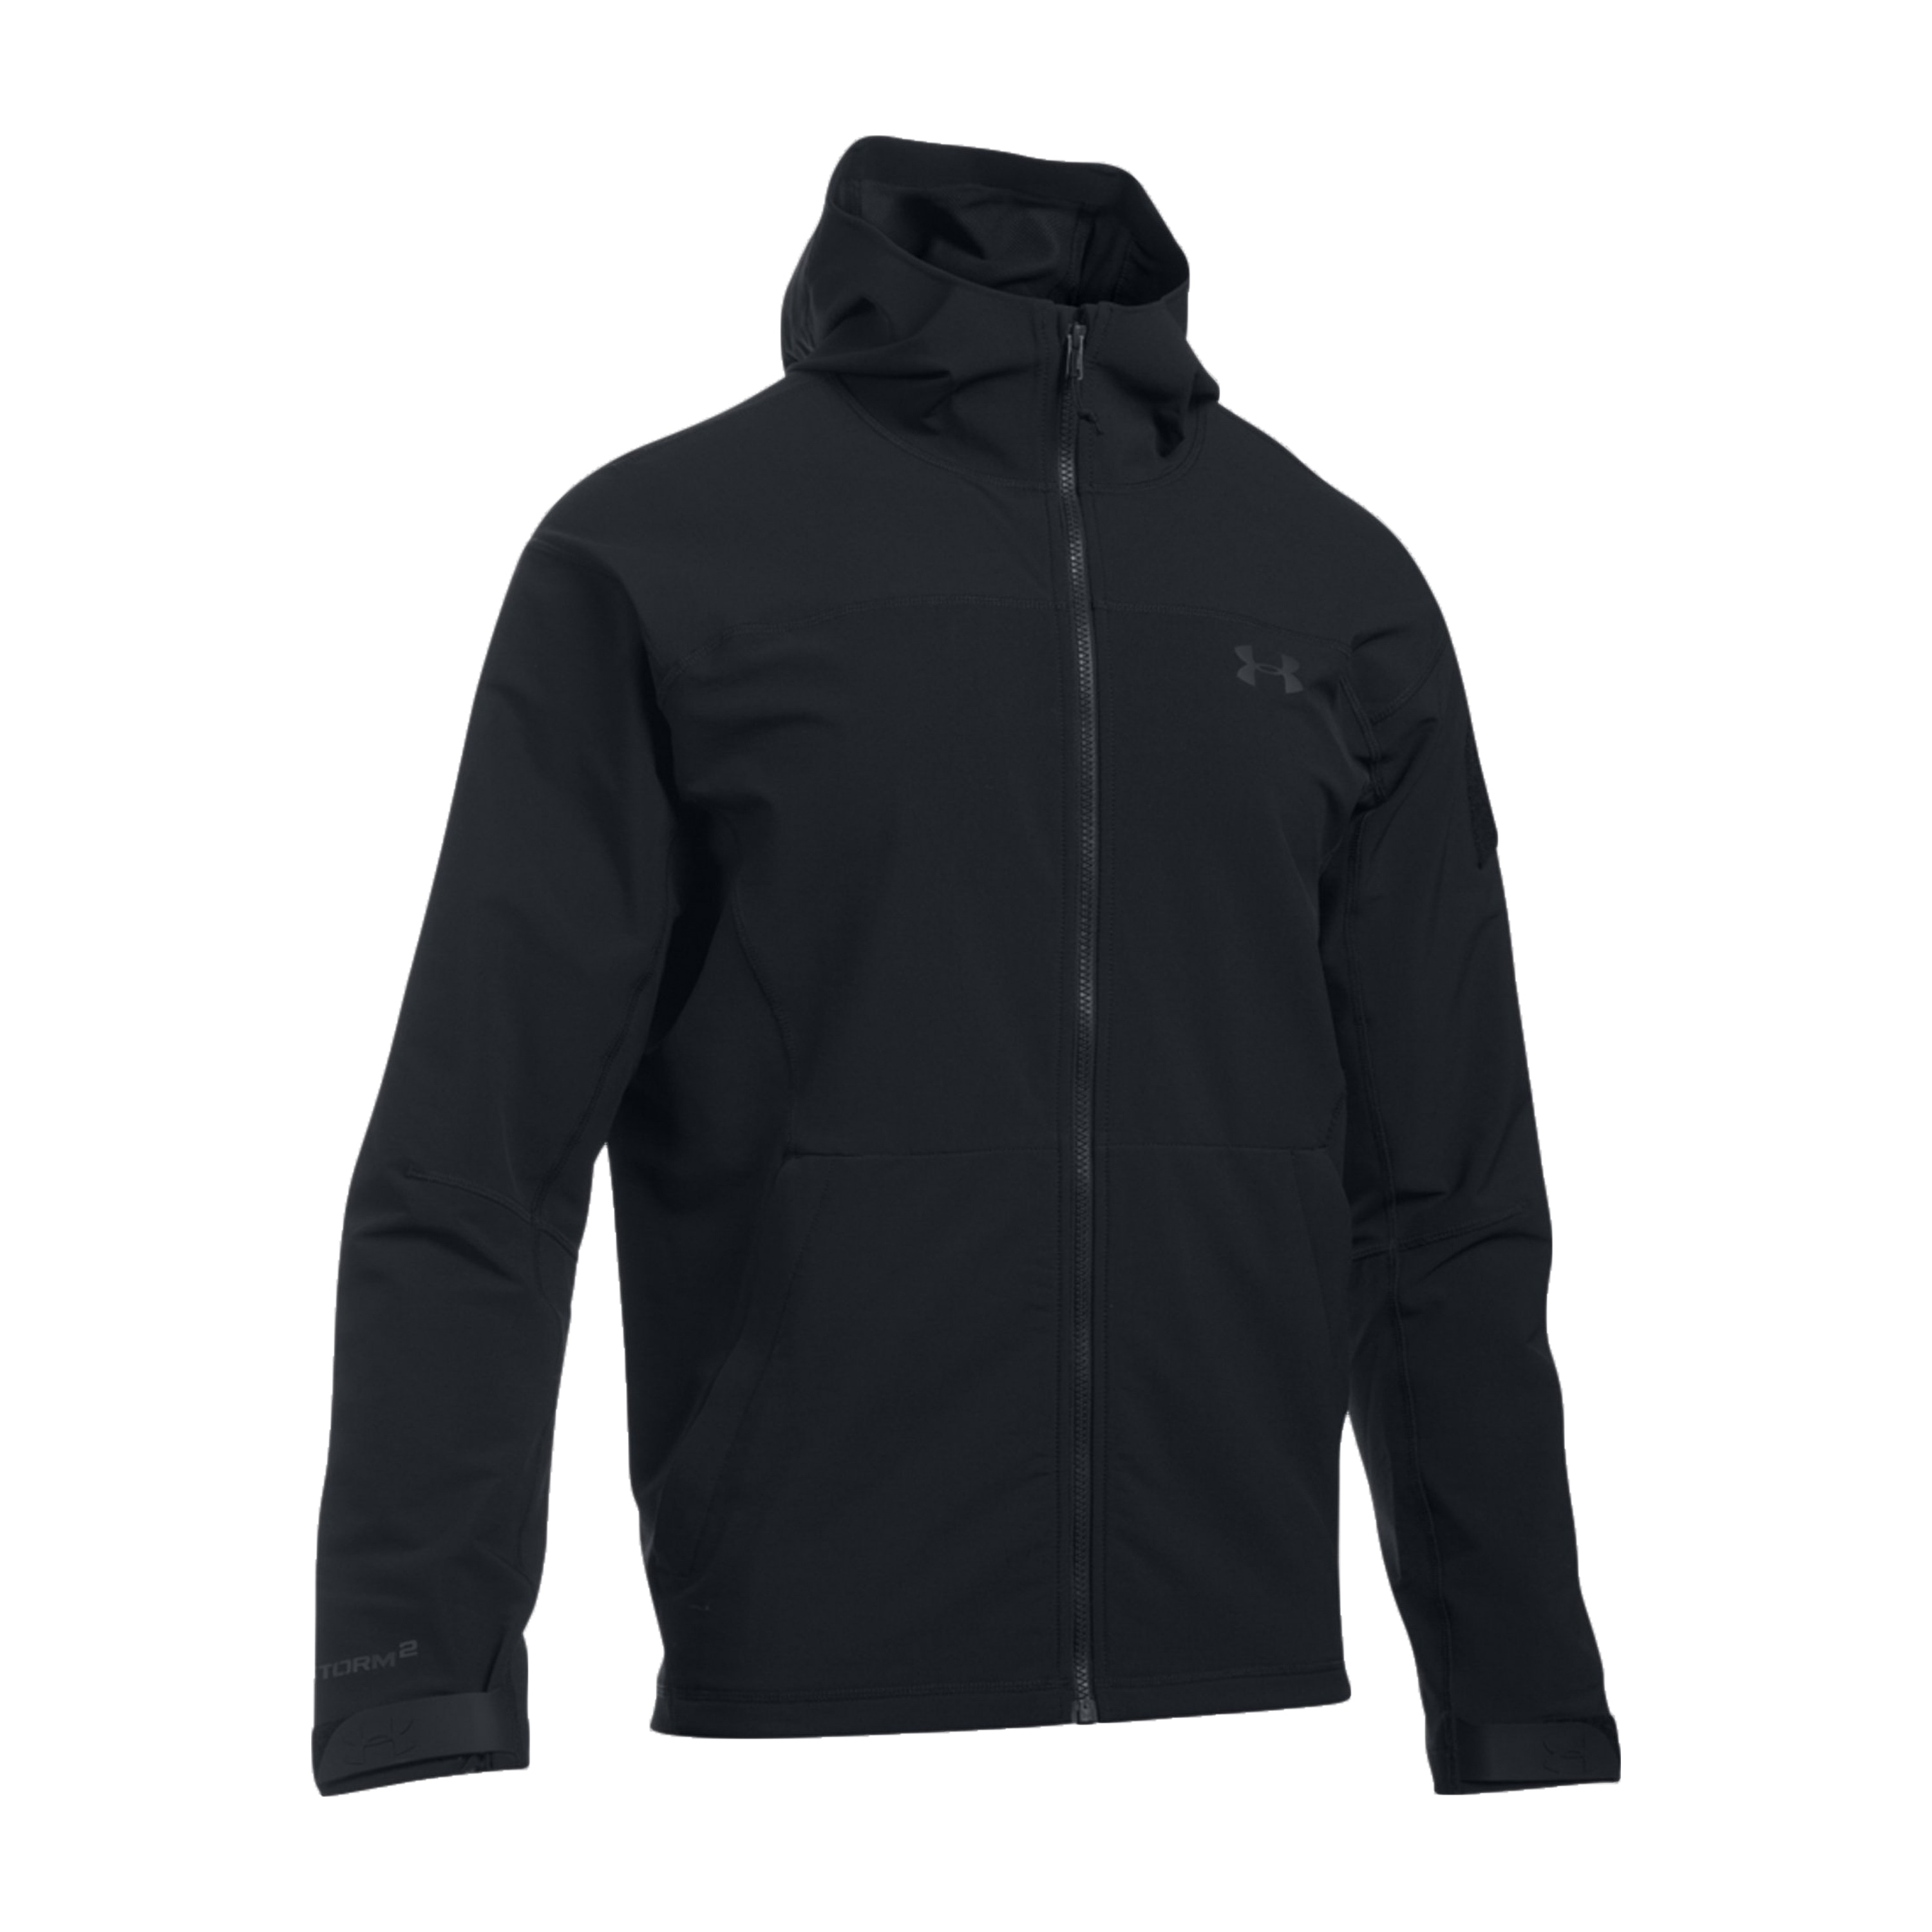 under armour soft shell